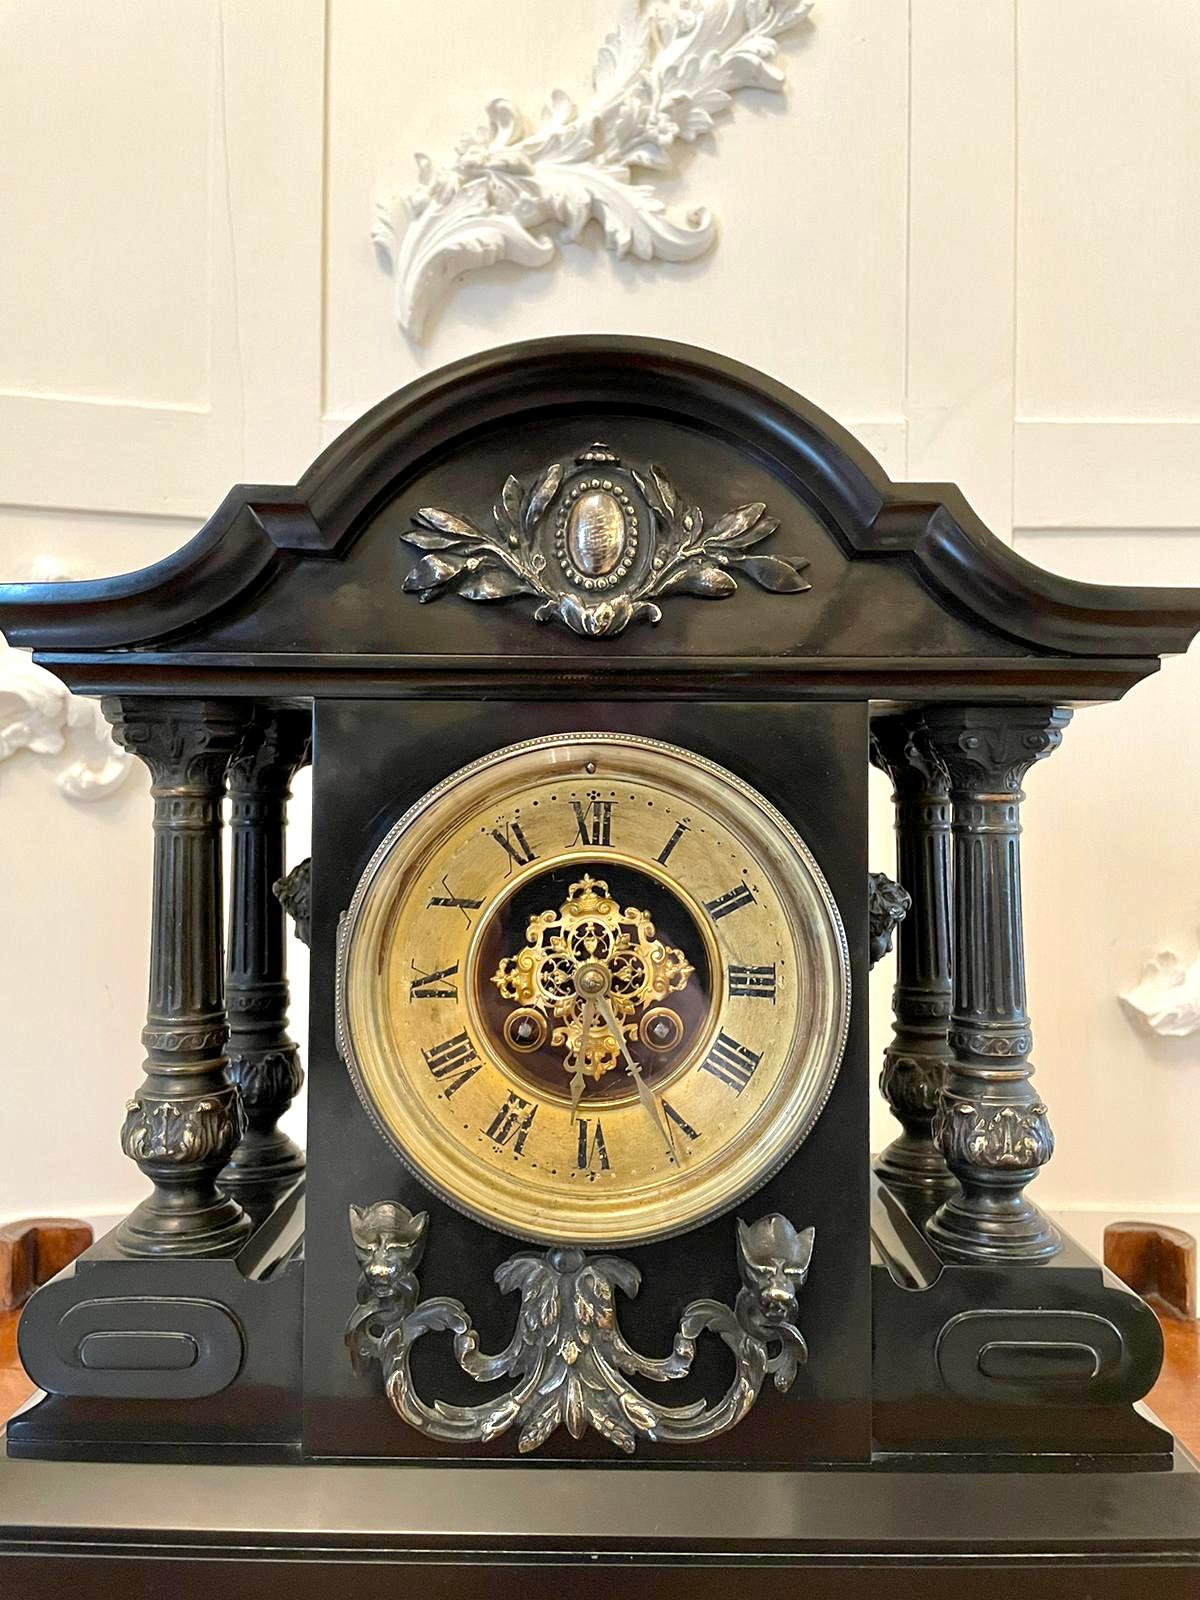 Magnificent French marble eight-day mantel clock having an exquisite brass bezel ornate brass face with original hands, eight-day movement striking on the hour and half hour, shaped top with pretty ornate brass mounts supported by four impressive